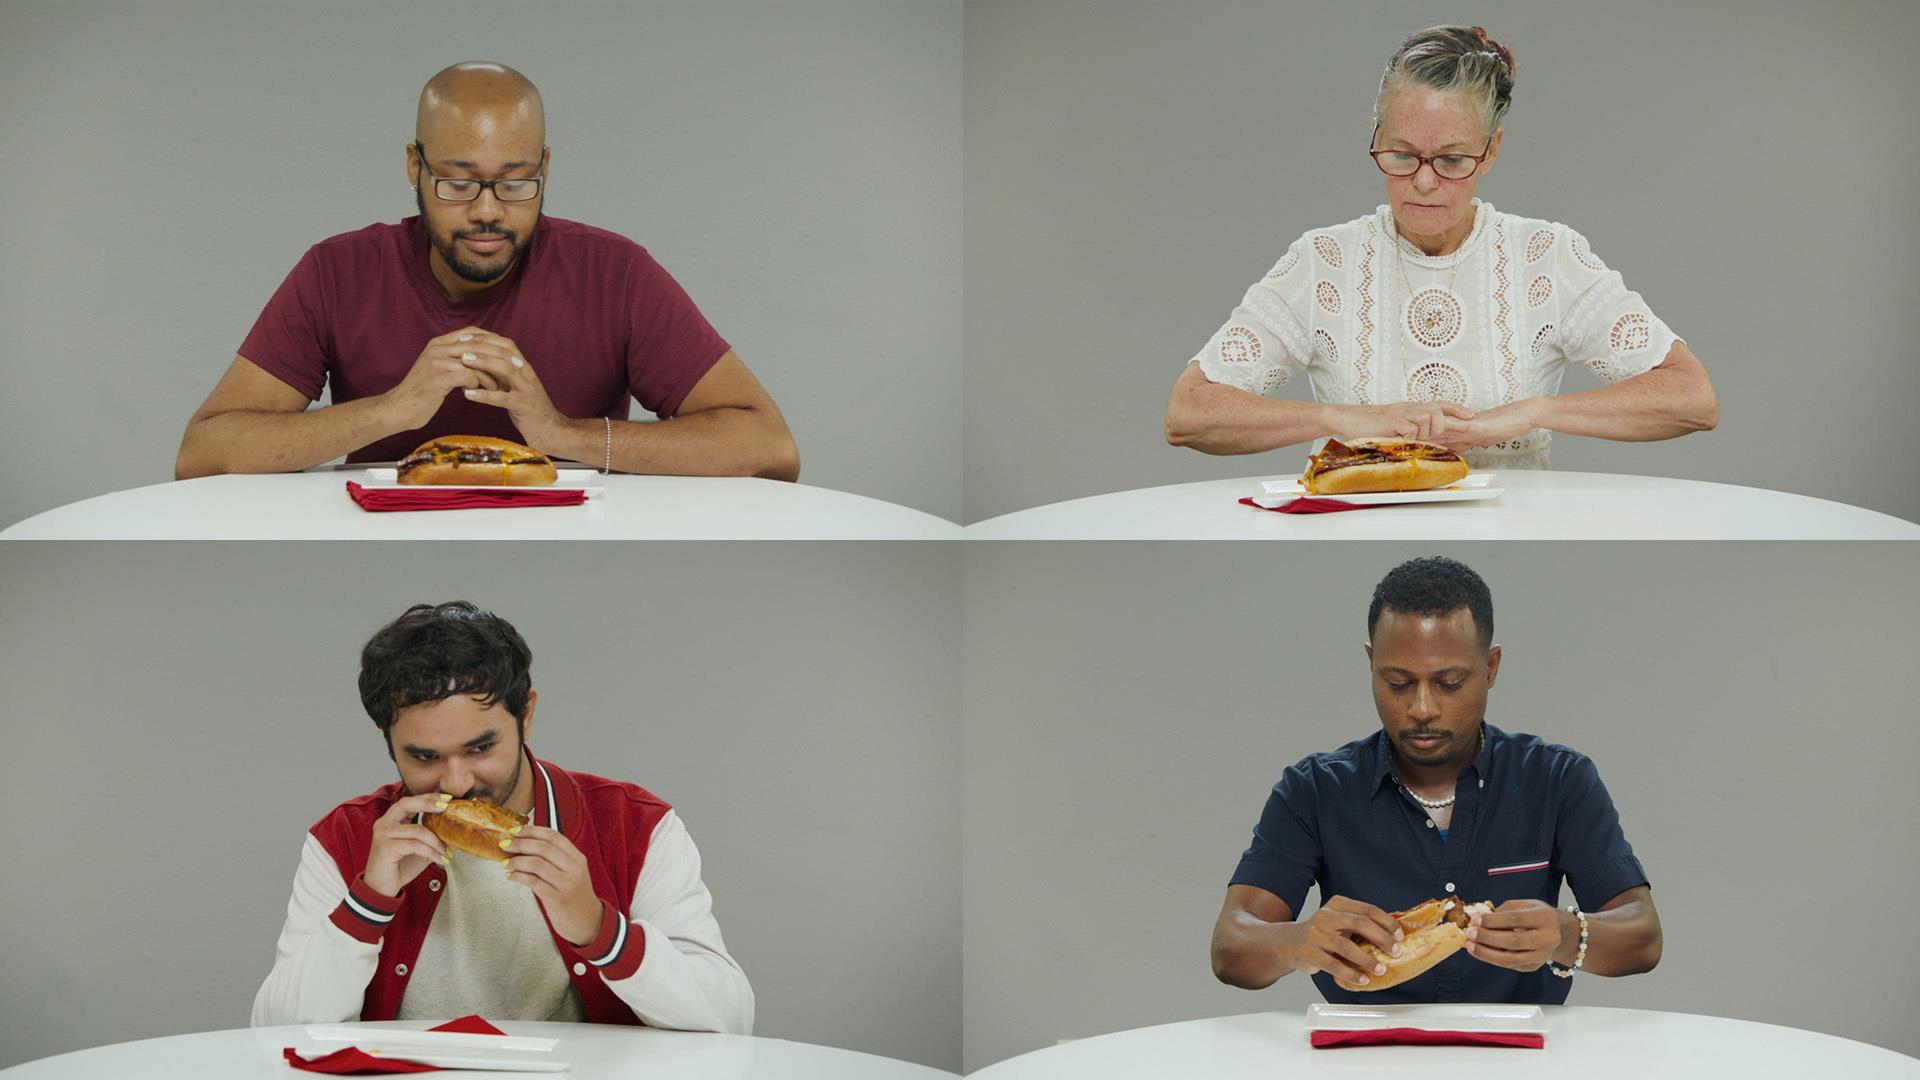 How This Steak-Umm Campaign by Tombras Brings Authenticity to Purpose-Based Marketing